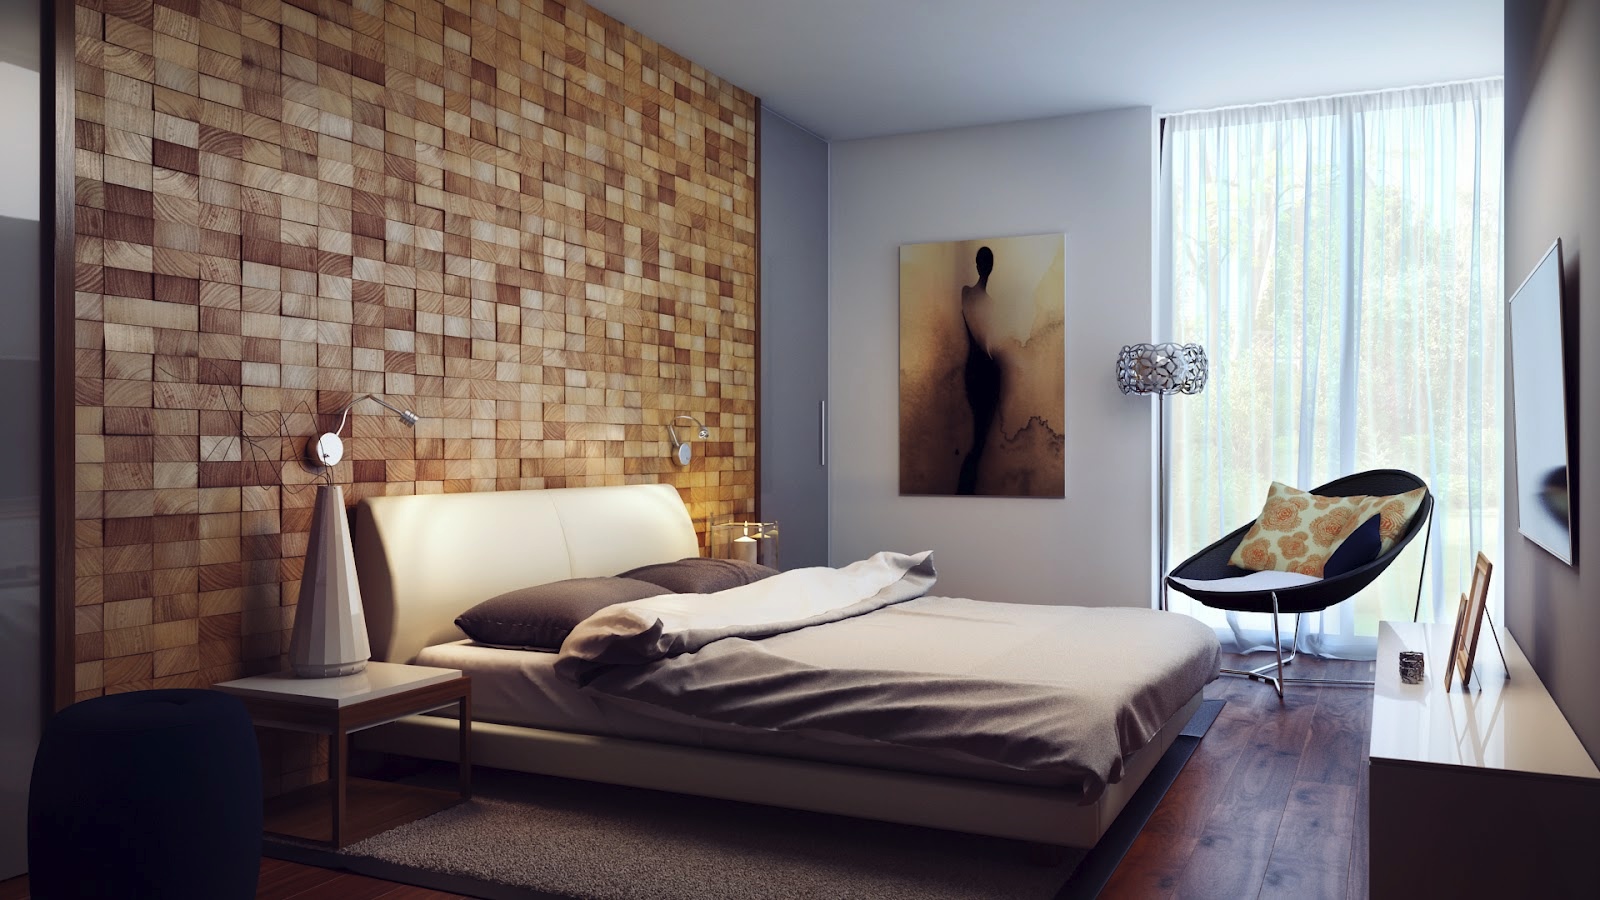 Bed Headboard and Background Design Ideas